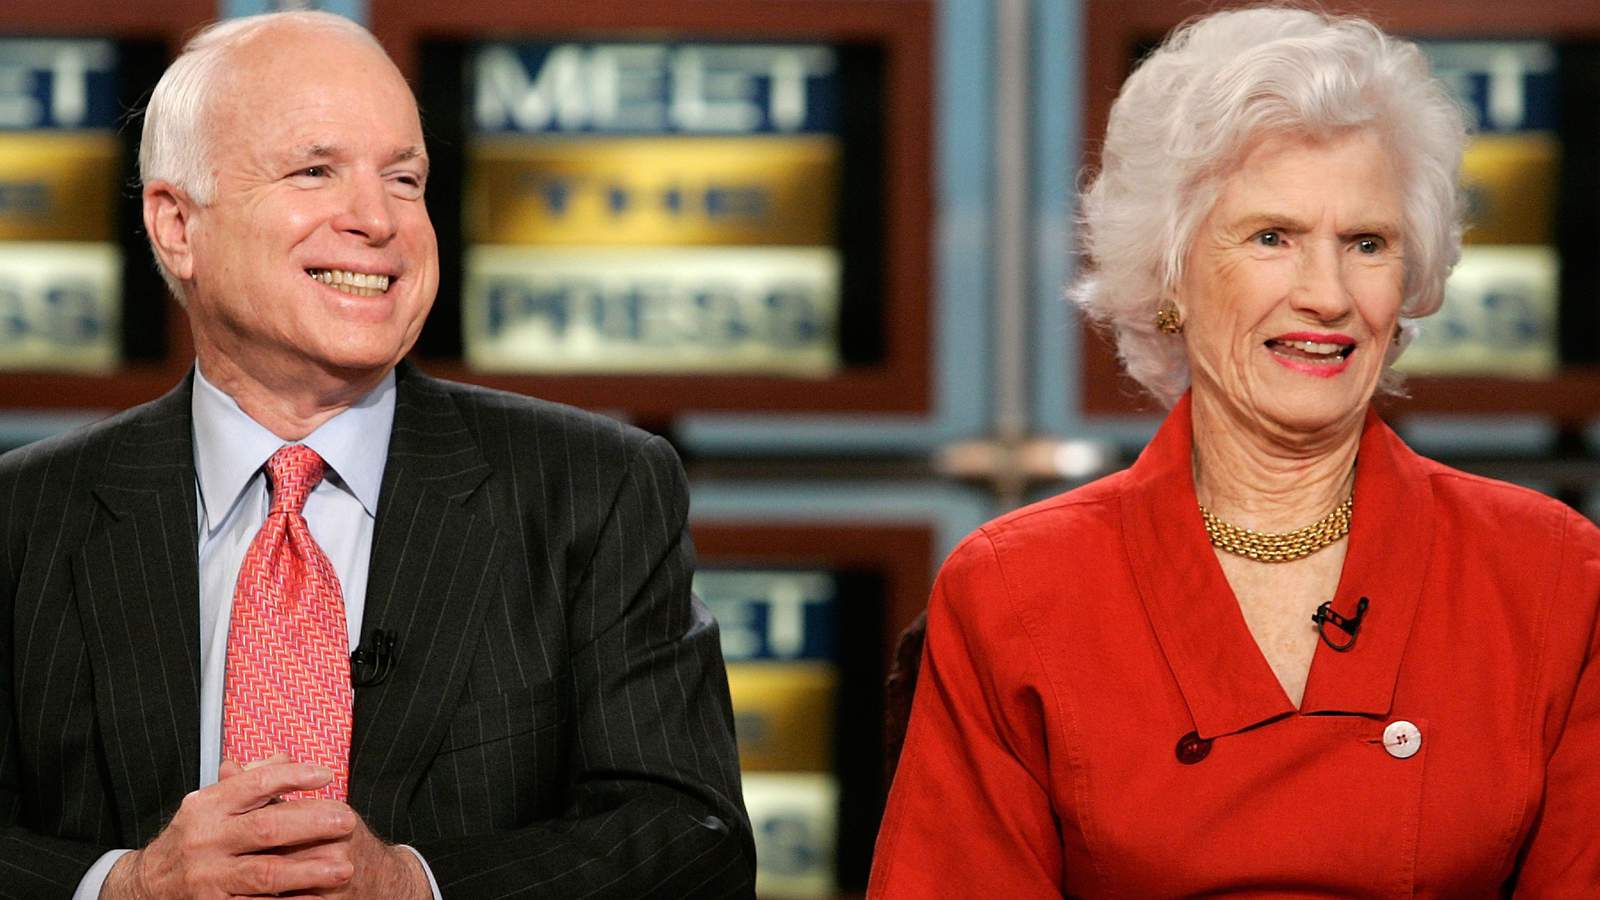 The mother of U.S. Sen. John McCain, whose feisty personality became her son’s secret weapon during his 2008 presidential campaign, has died. Roberta Wright McCain was 108.